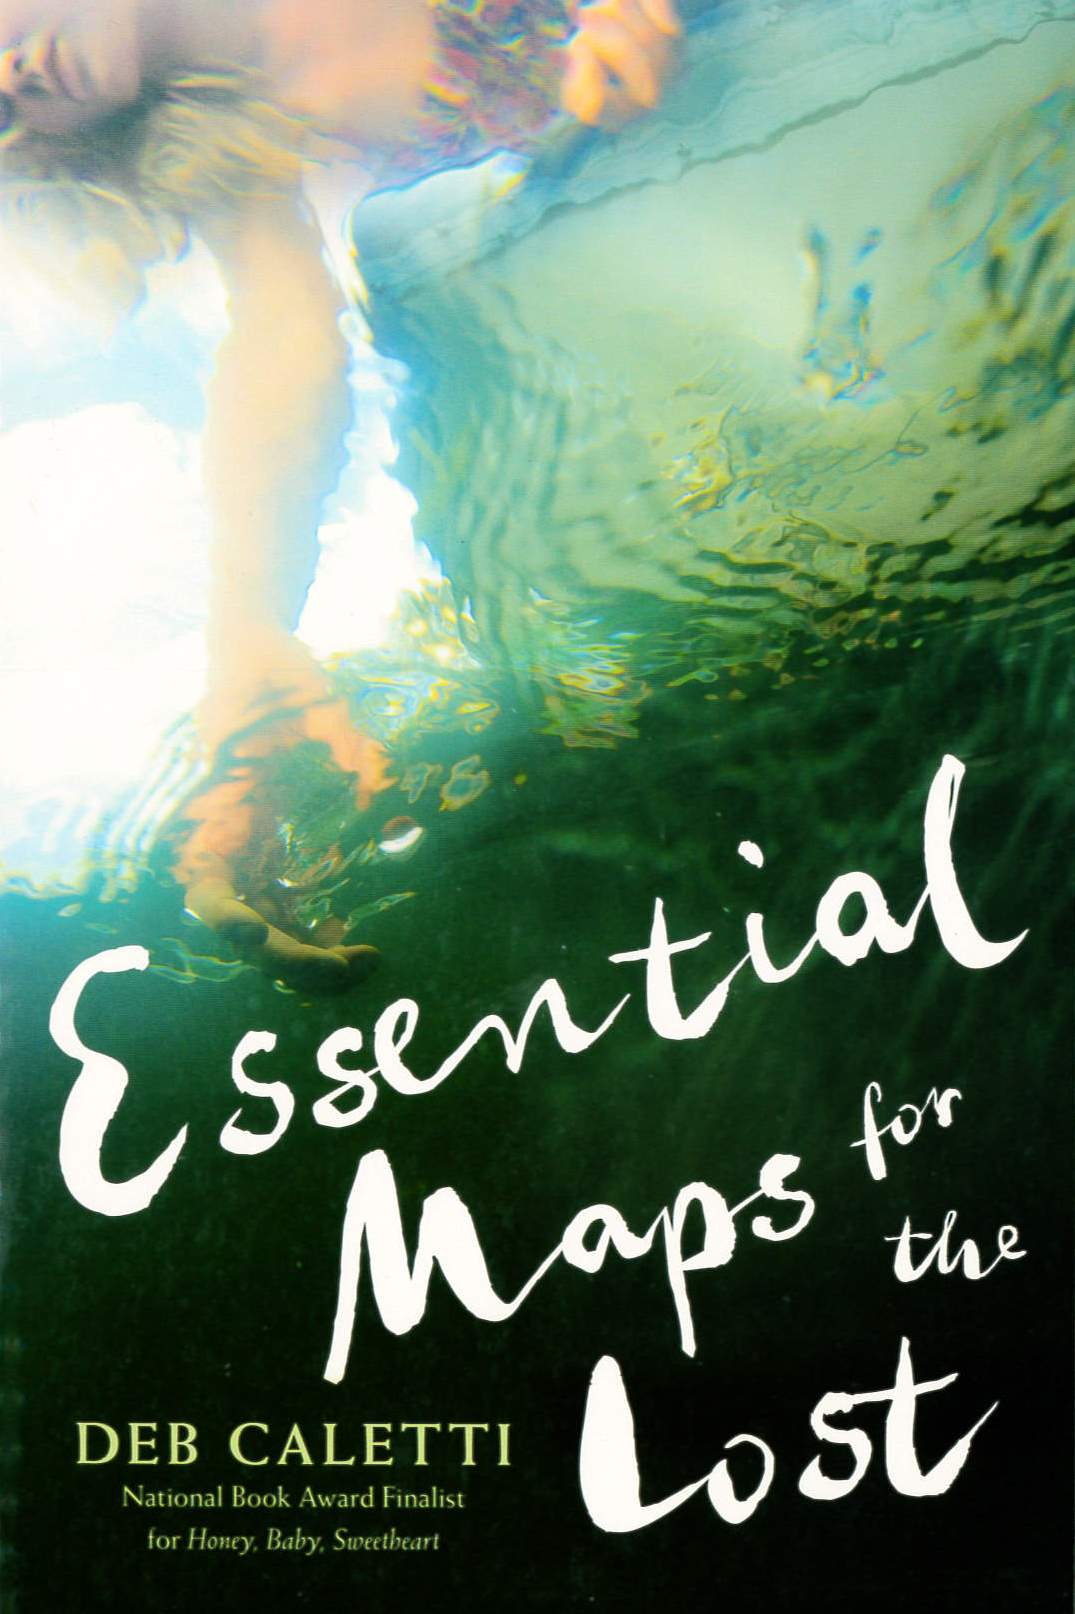 Essential maps for the lost /